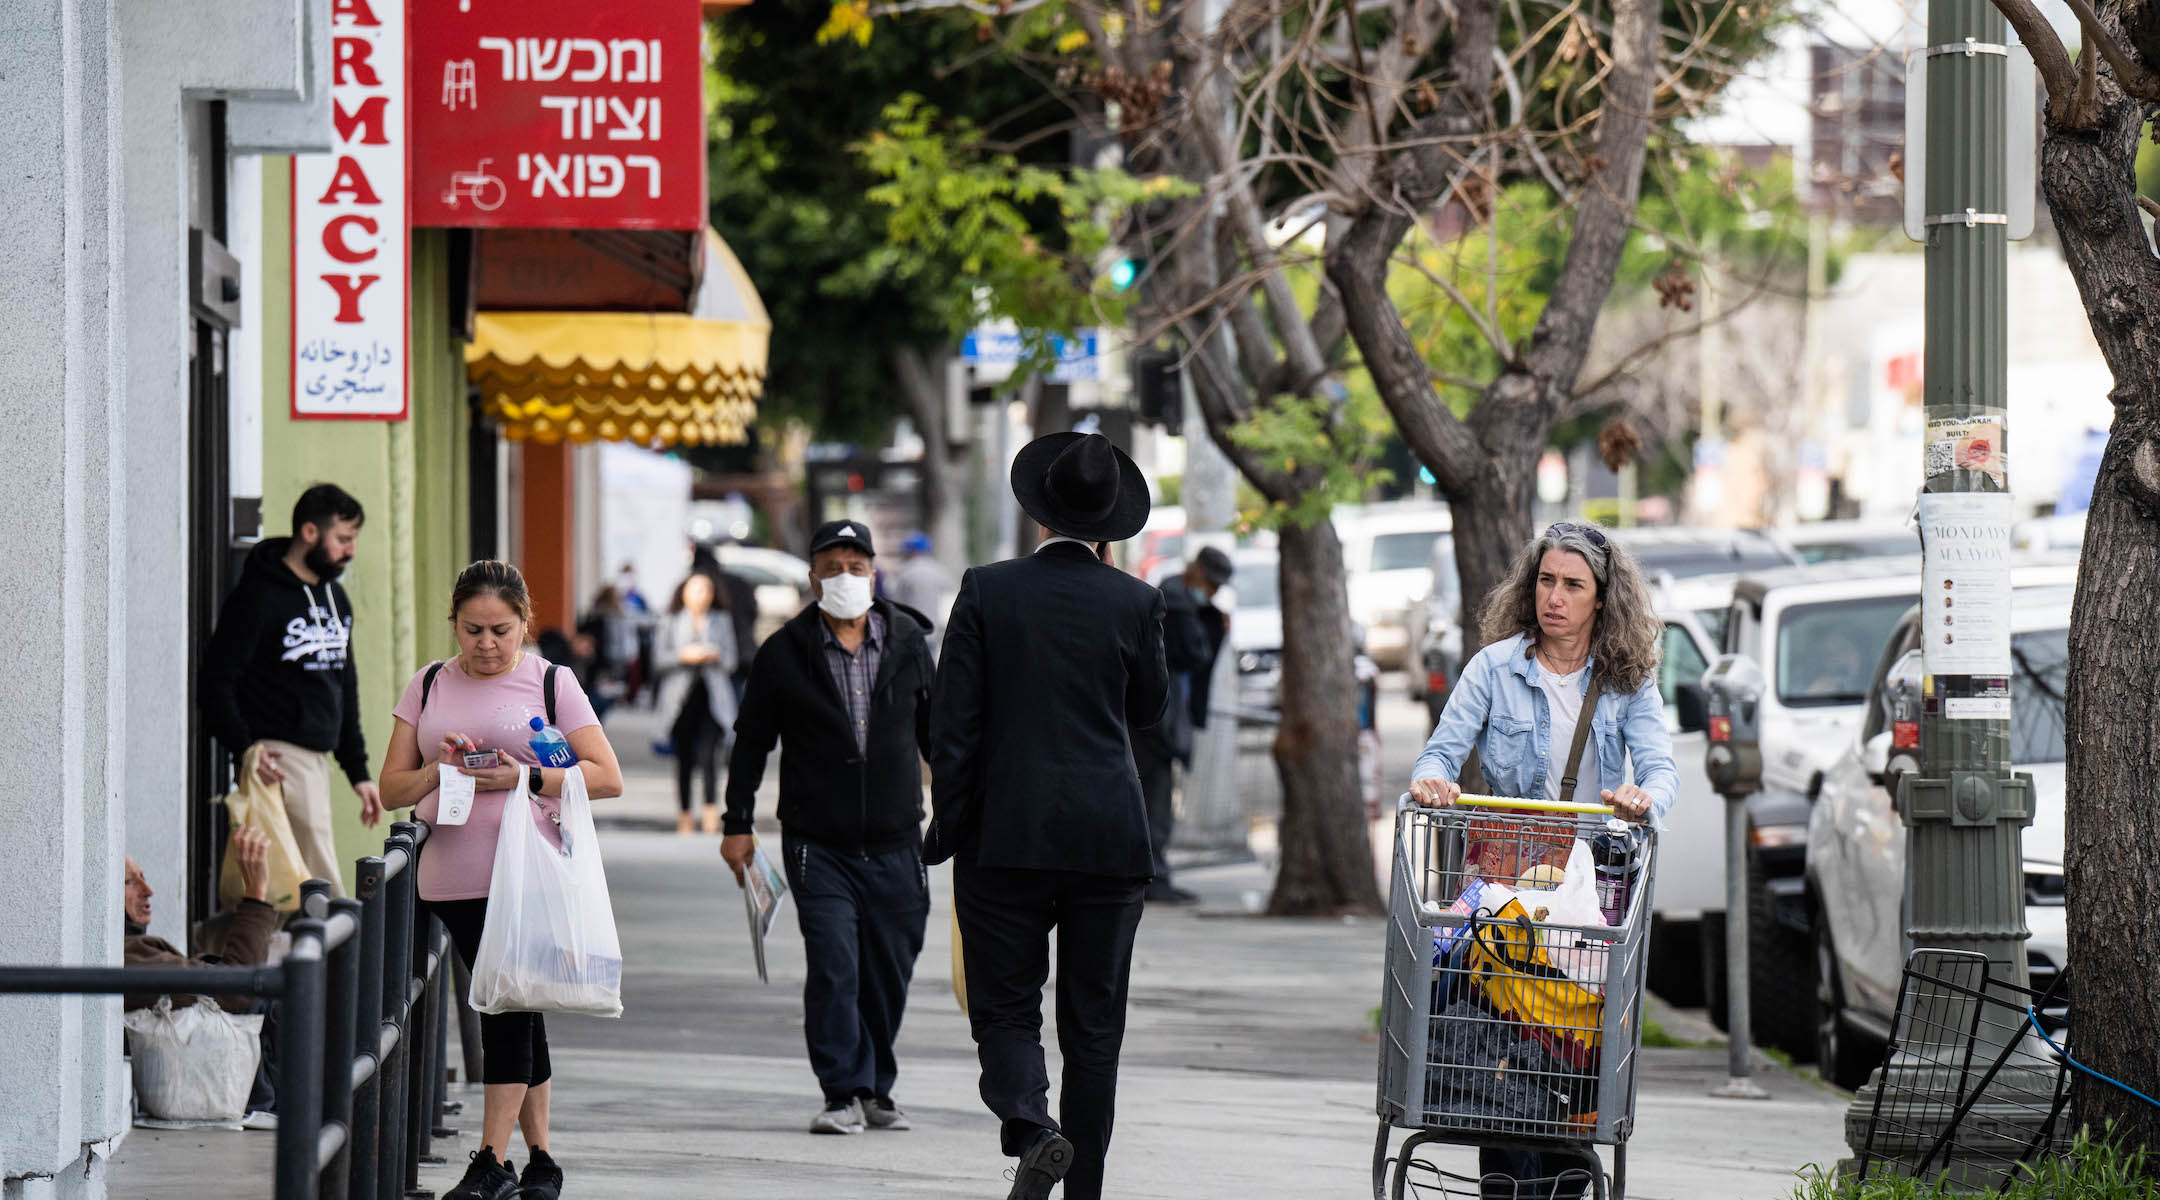 The new location of the Ziegler School of Rabbinic Studies is a few blocks away from the kosher establishments and synagogues of Los Angeles’ Pico-Robertston neighborhood. (Sarah Reingewirtz, Los Angeles Daily News/SCNG)